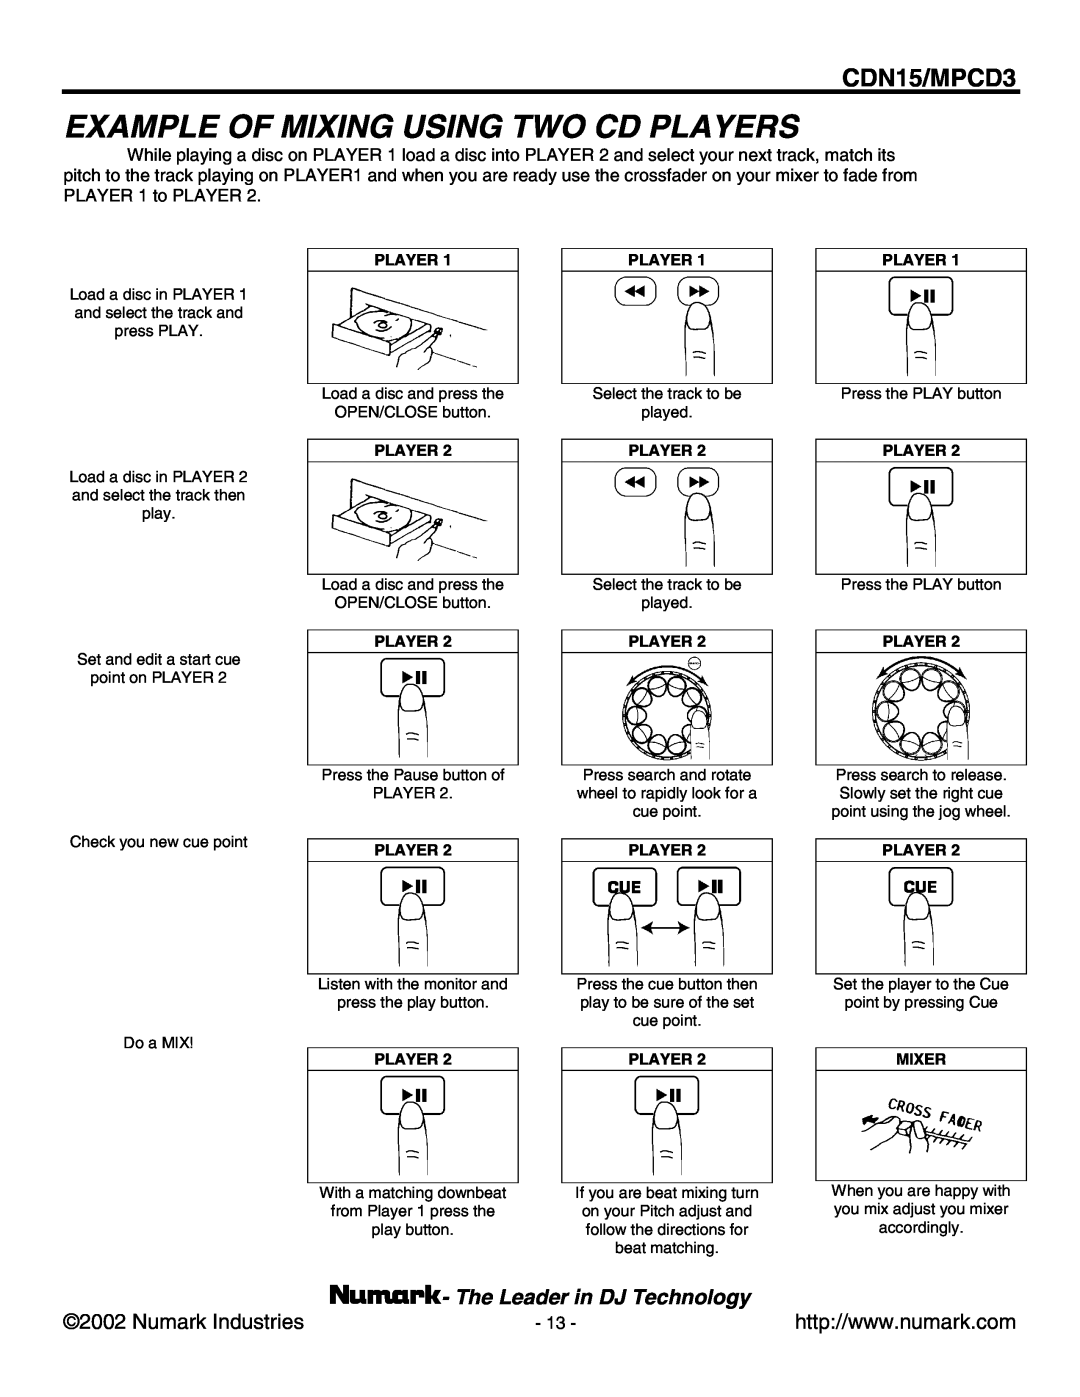 Numark Industries CDN15, MPCD3 user manual Example Of Mixing Using Two Cd Players, The Leader in DJ Technology, Mixer 